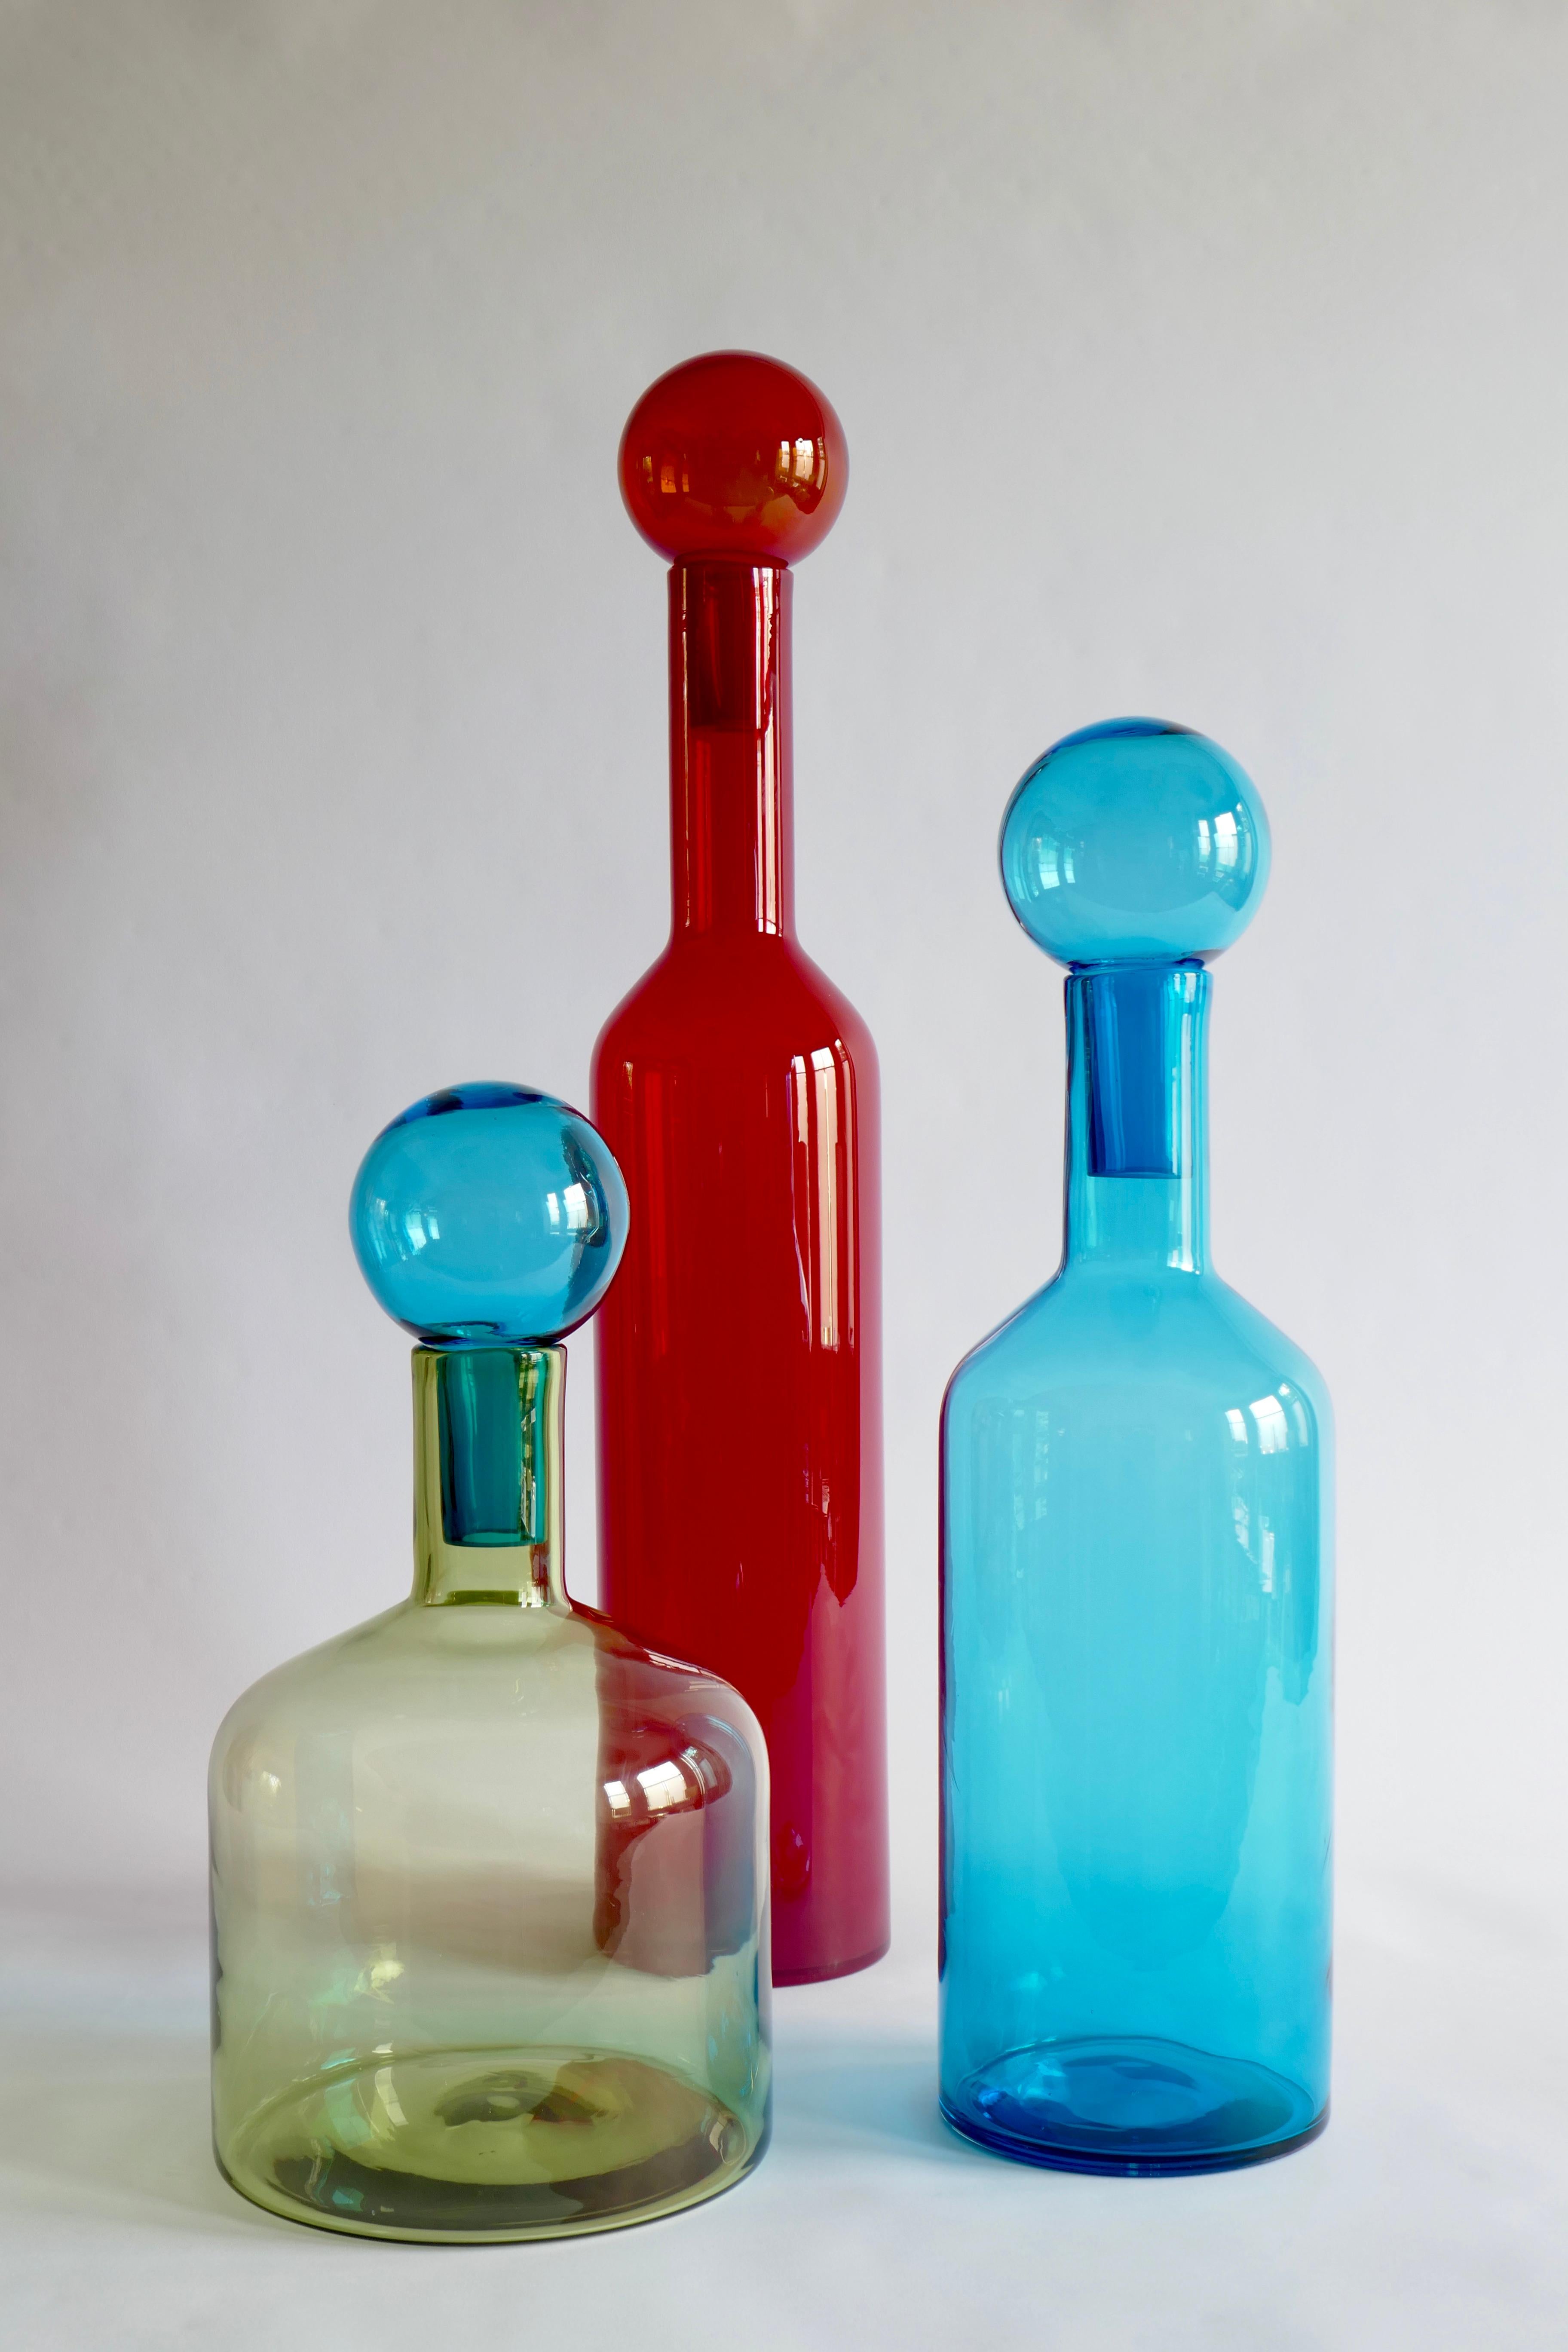 Set of 3 red, blue and green Murano glass bottles, Italy, 2000s
Red one is 75x12cm
Blue one is 56x15cm
green one is 43x23cm.
 